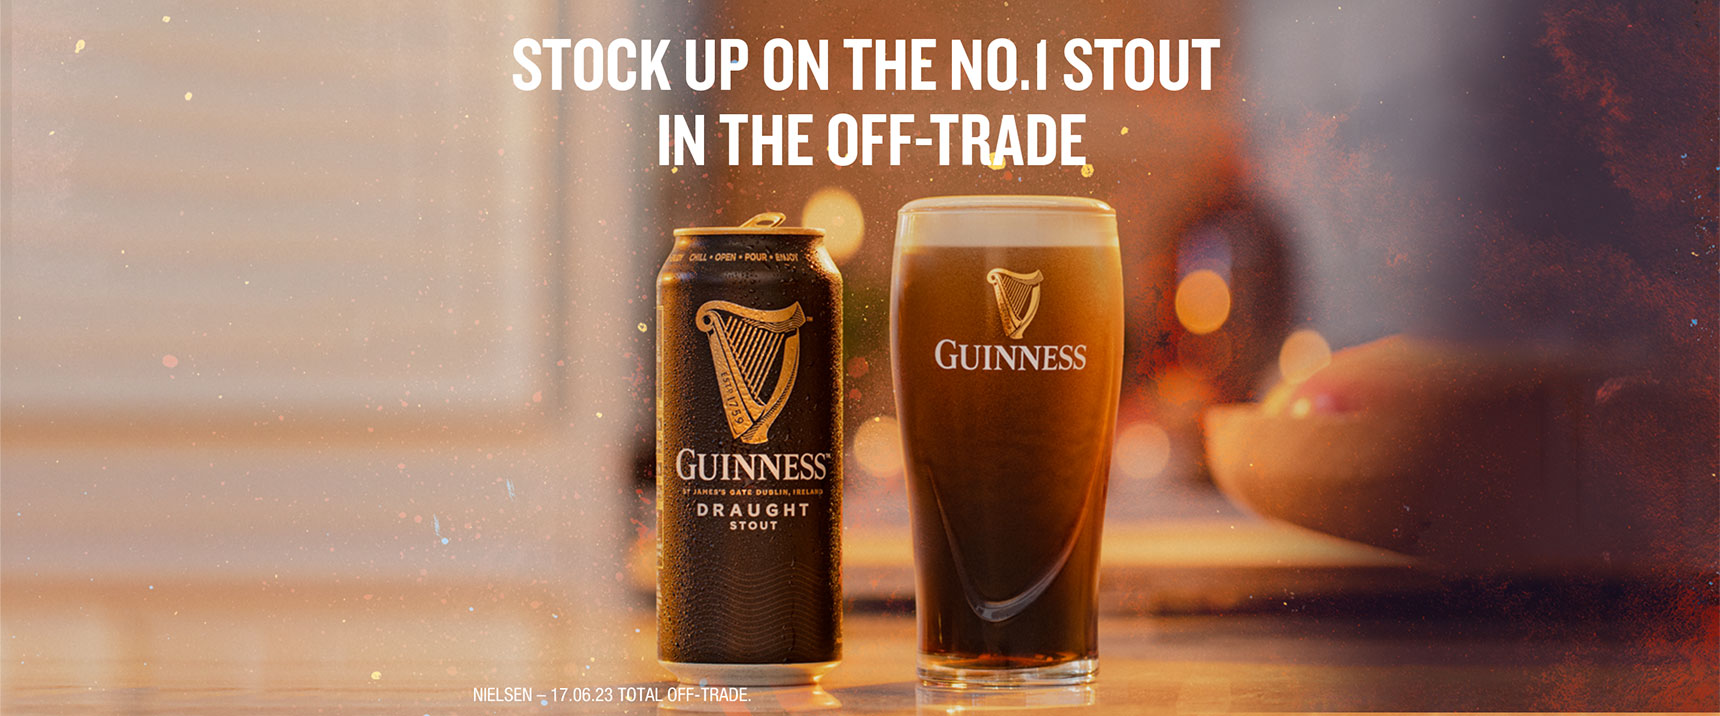 Stock up on the No.1 stout in the off-trade